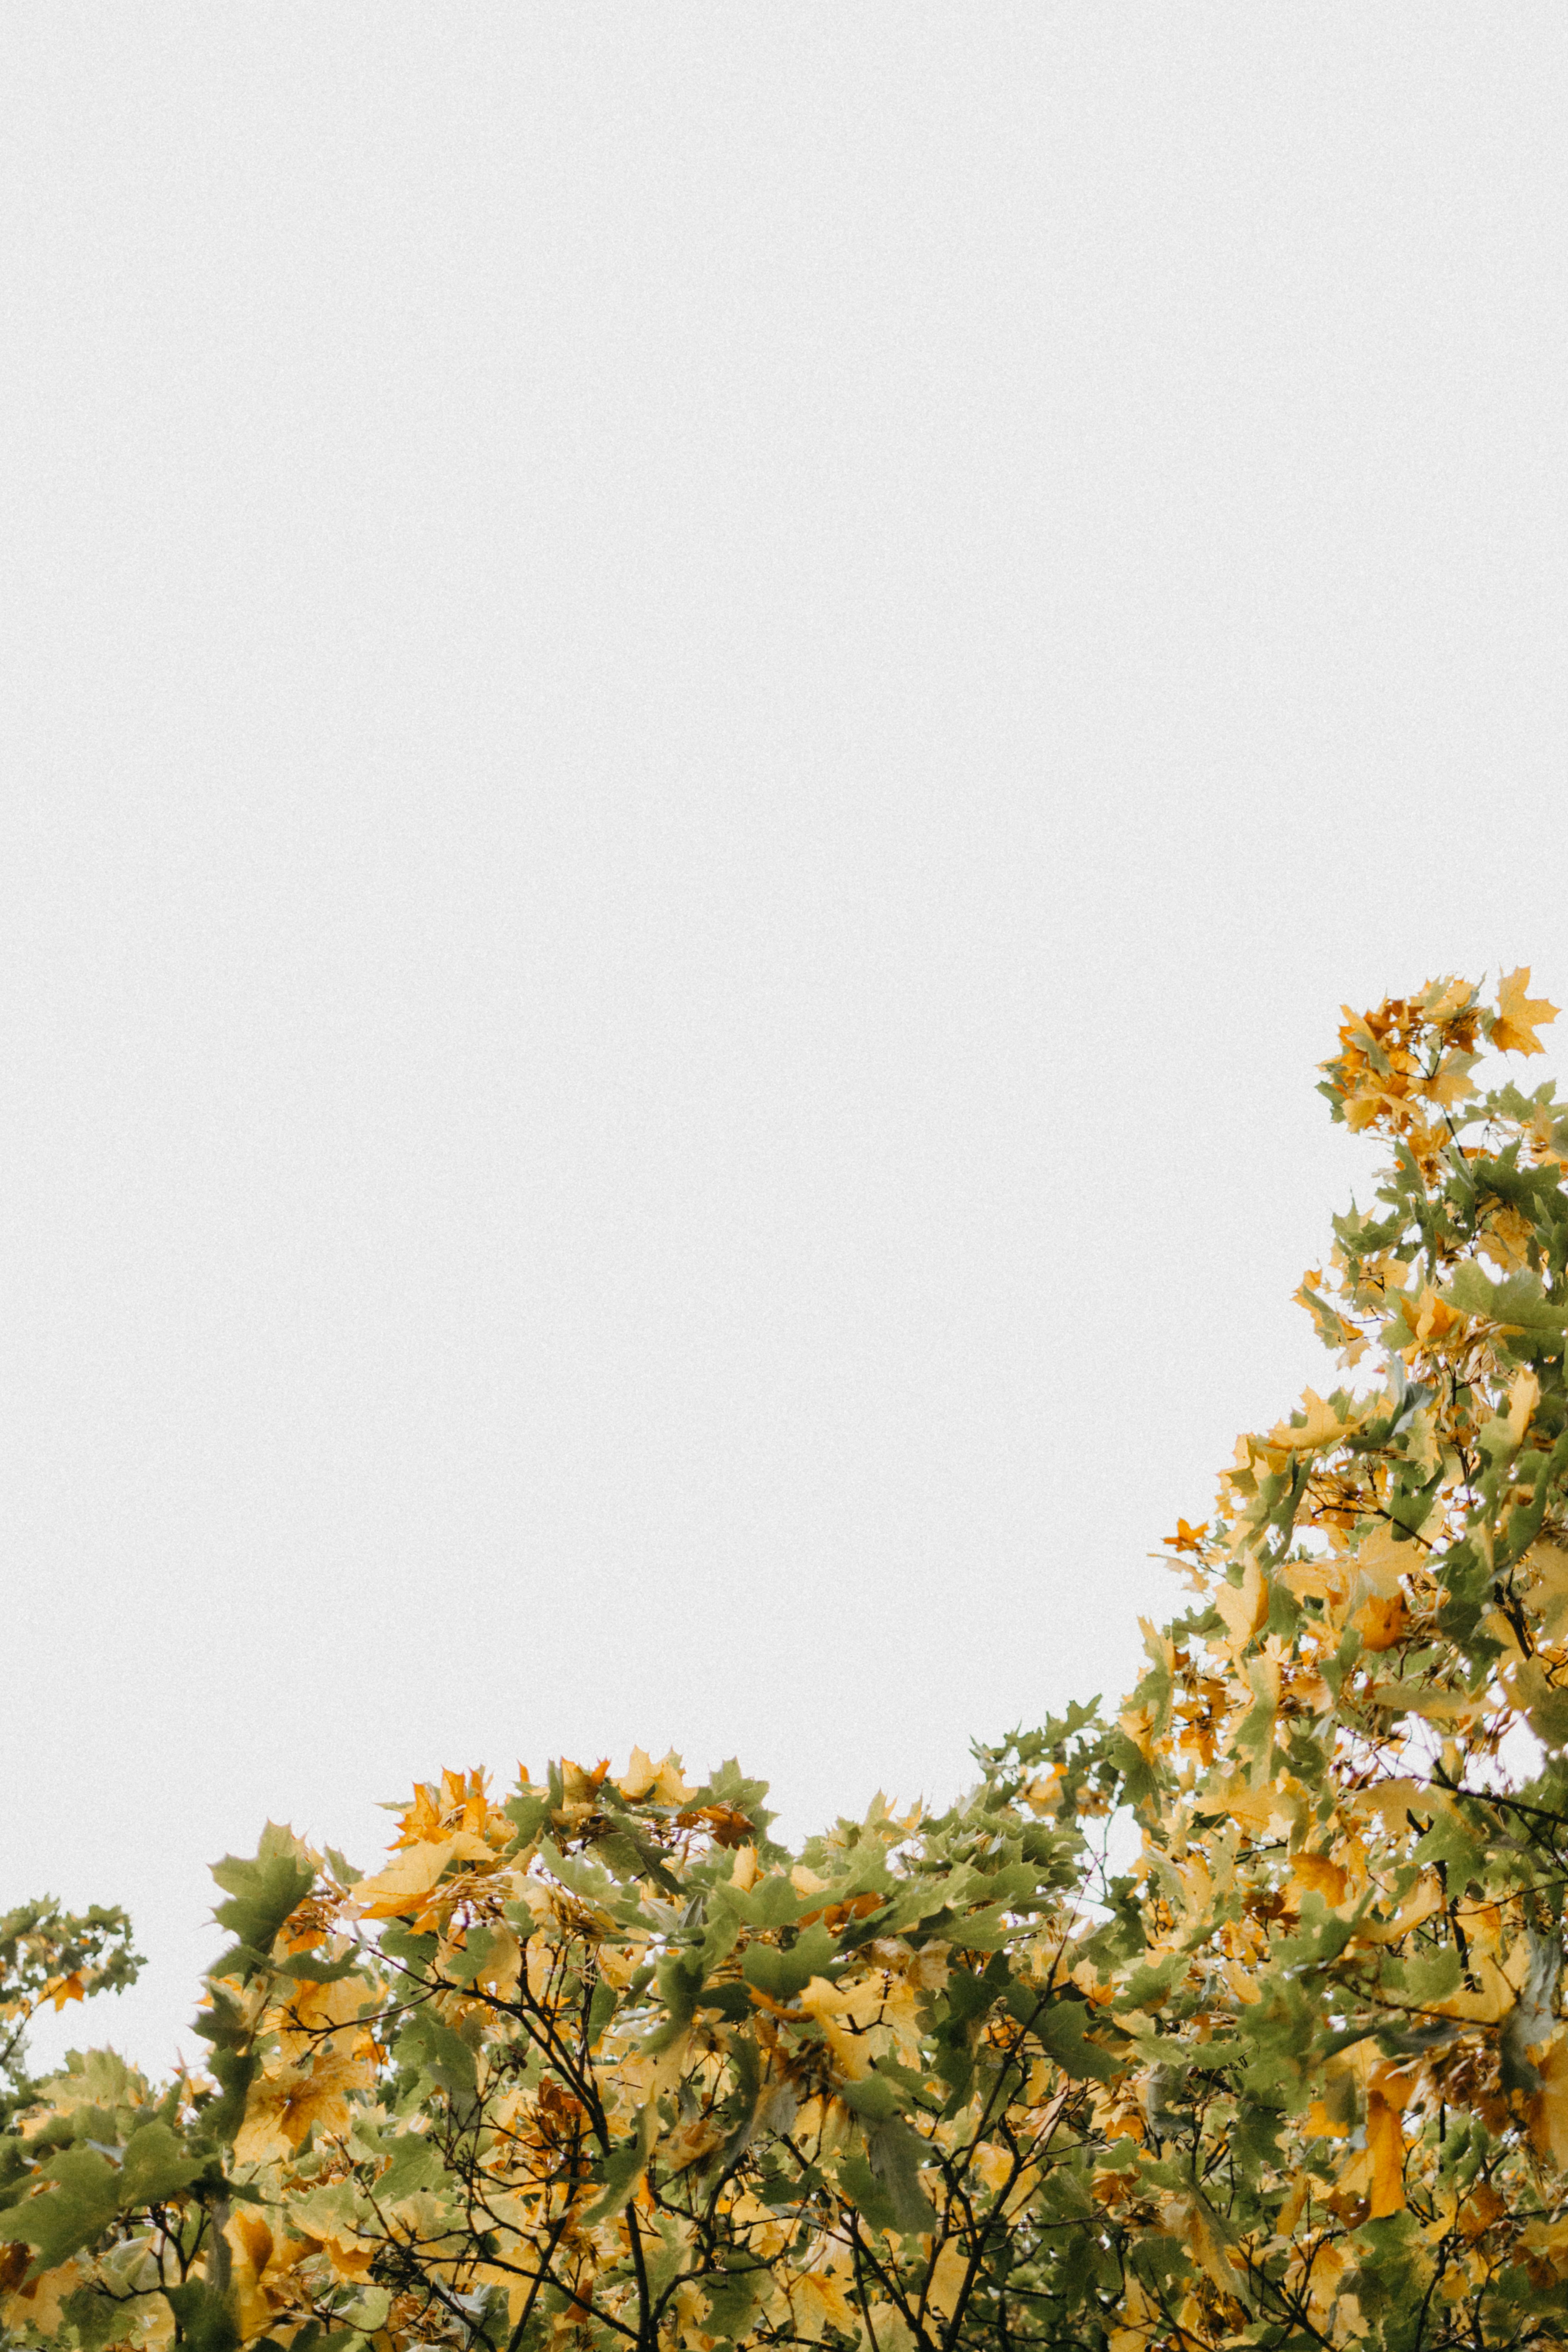 White and Yellow Flowers Under White Sky · Free Stock Photo